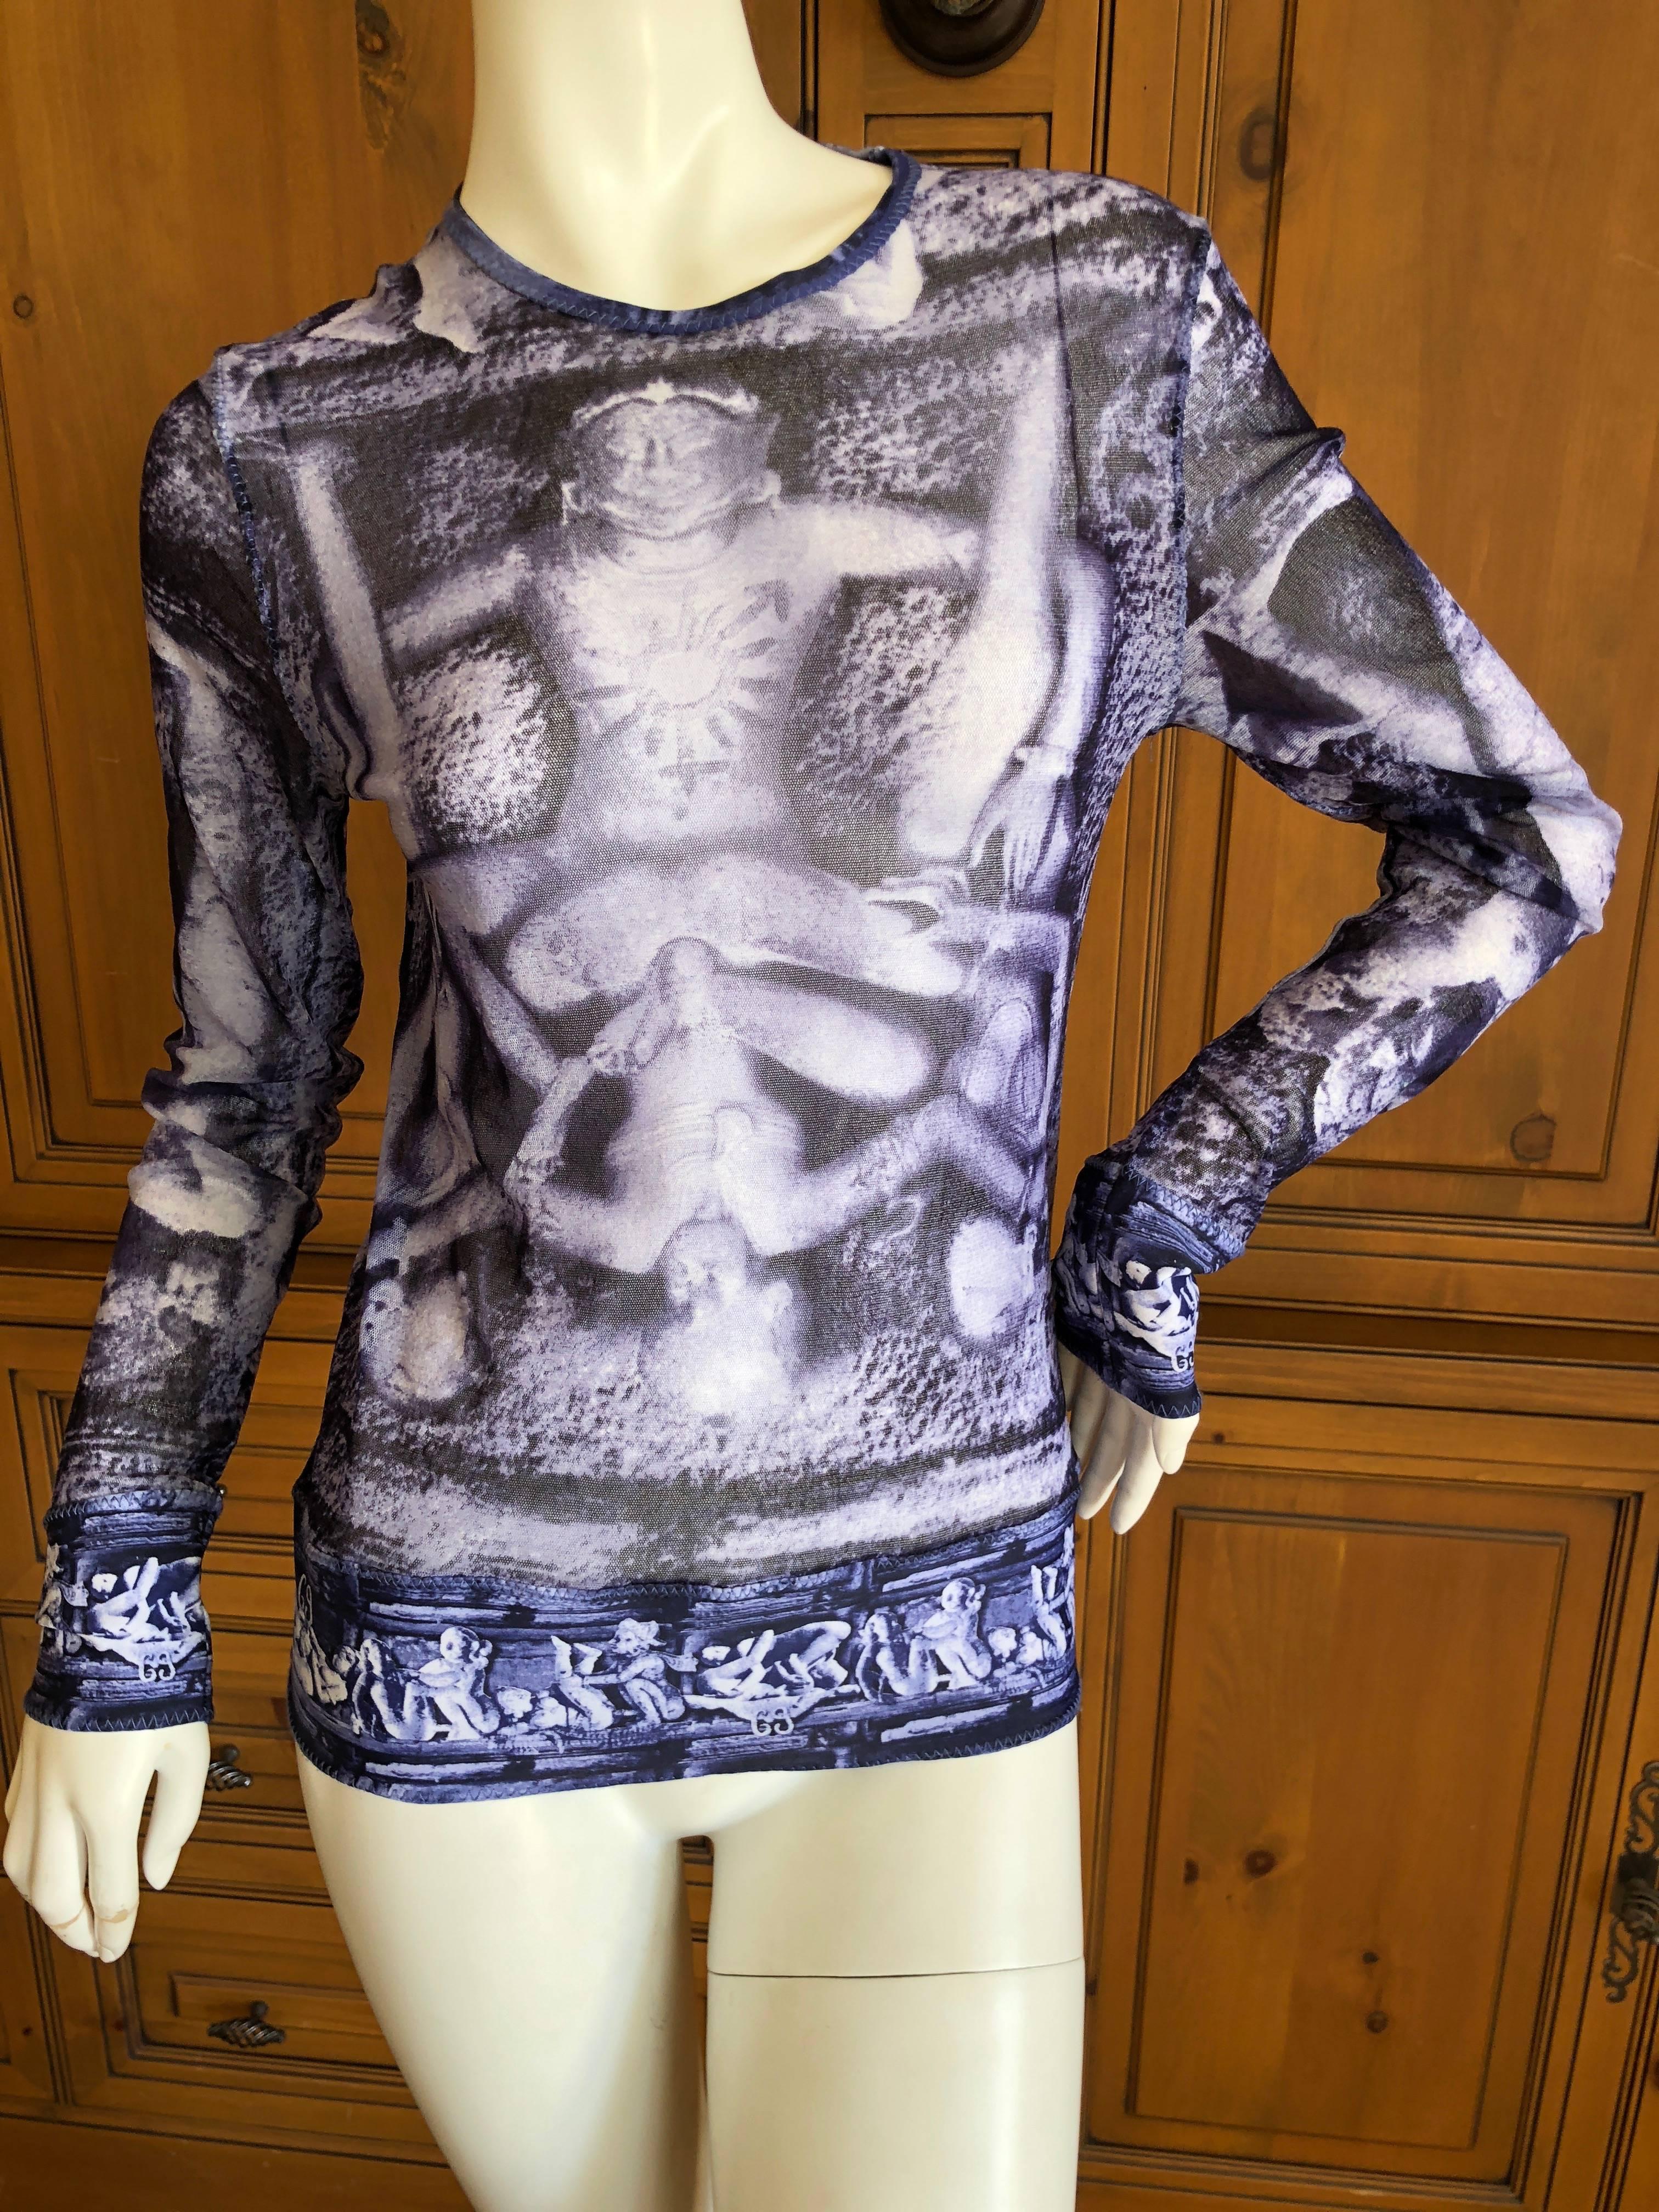 Wonderful sheer top from John Paul Gaultier Soliel, featuring erotic images from the Kama Sutra.
Size S
Bust 38